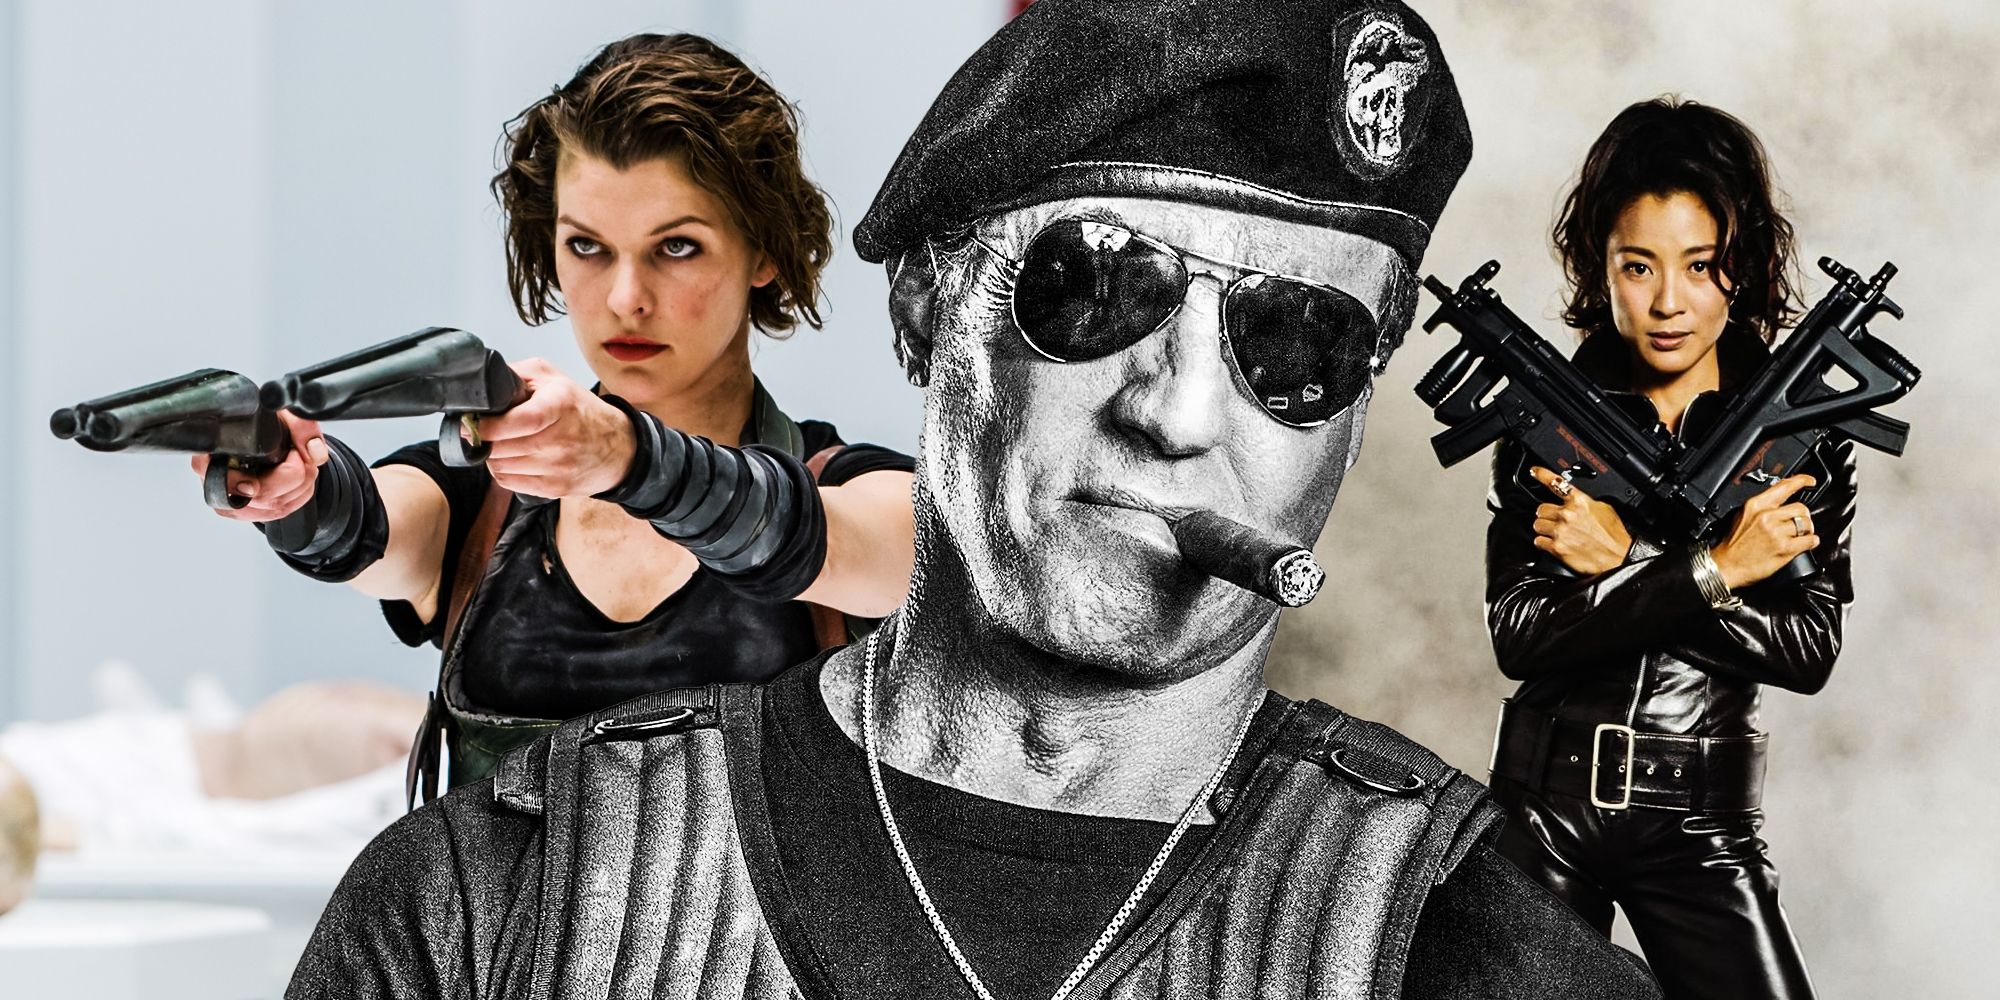 Expendables needs to cast female action icons michelle yeoh Milla jovovich